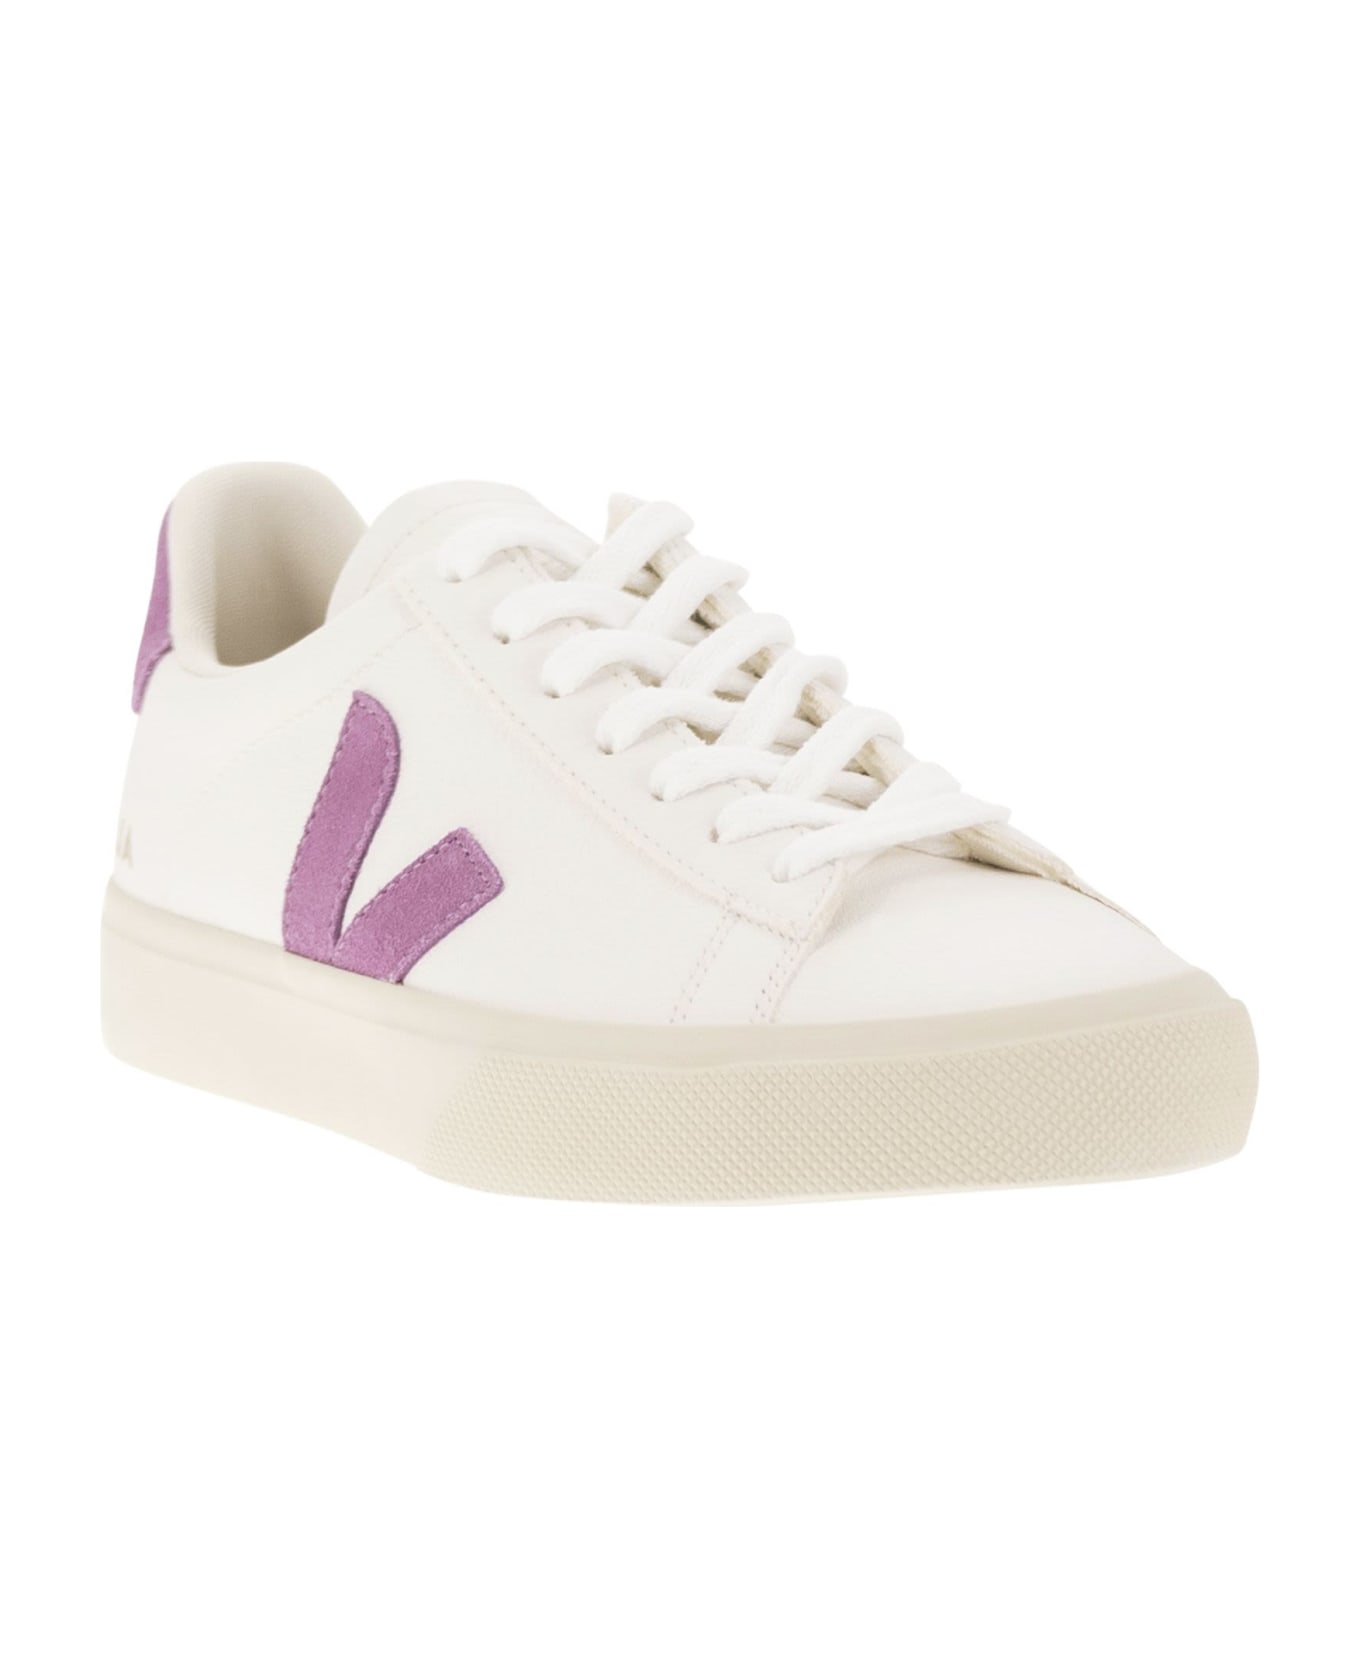 Veja Chromefree Leather Trainers - White/pink